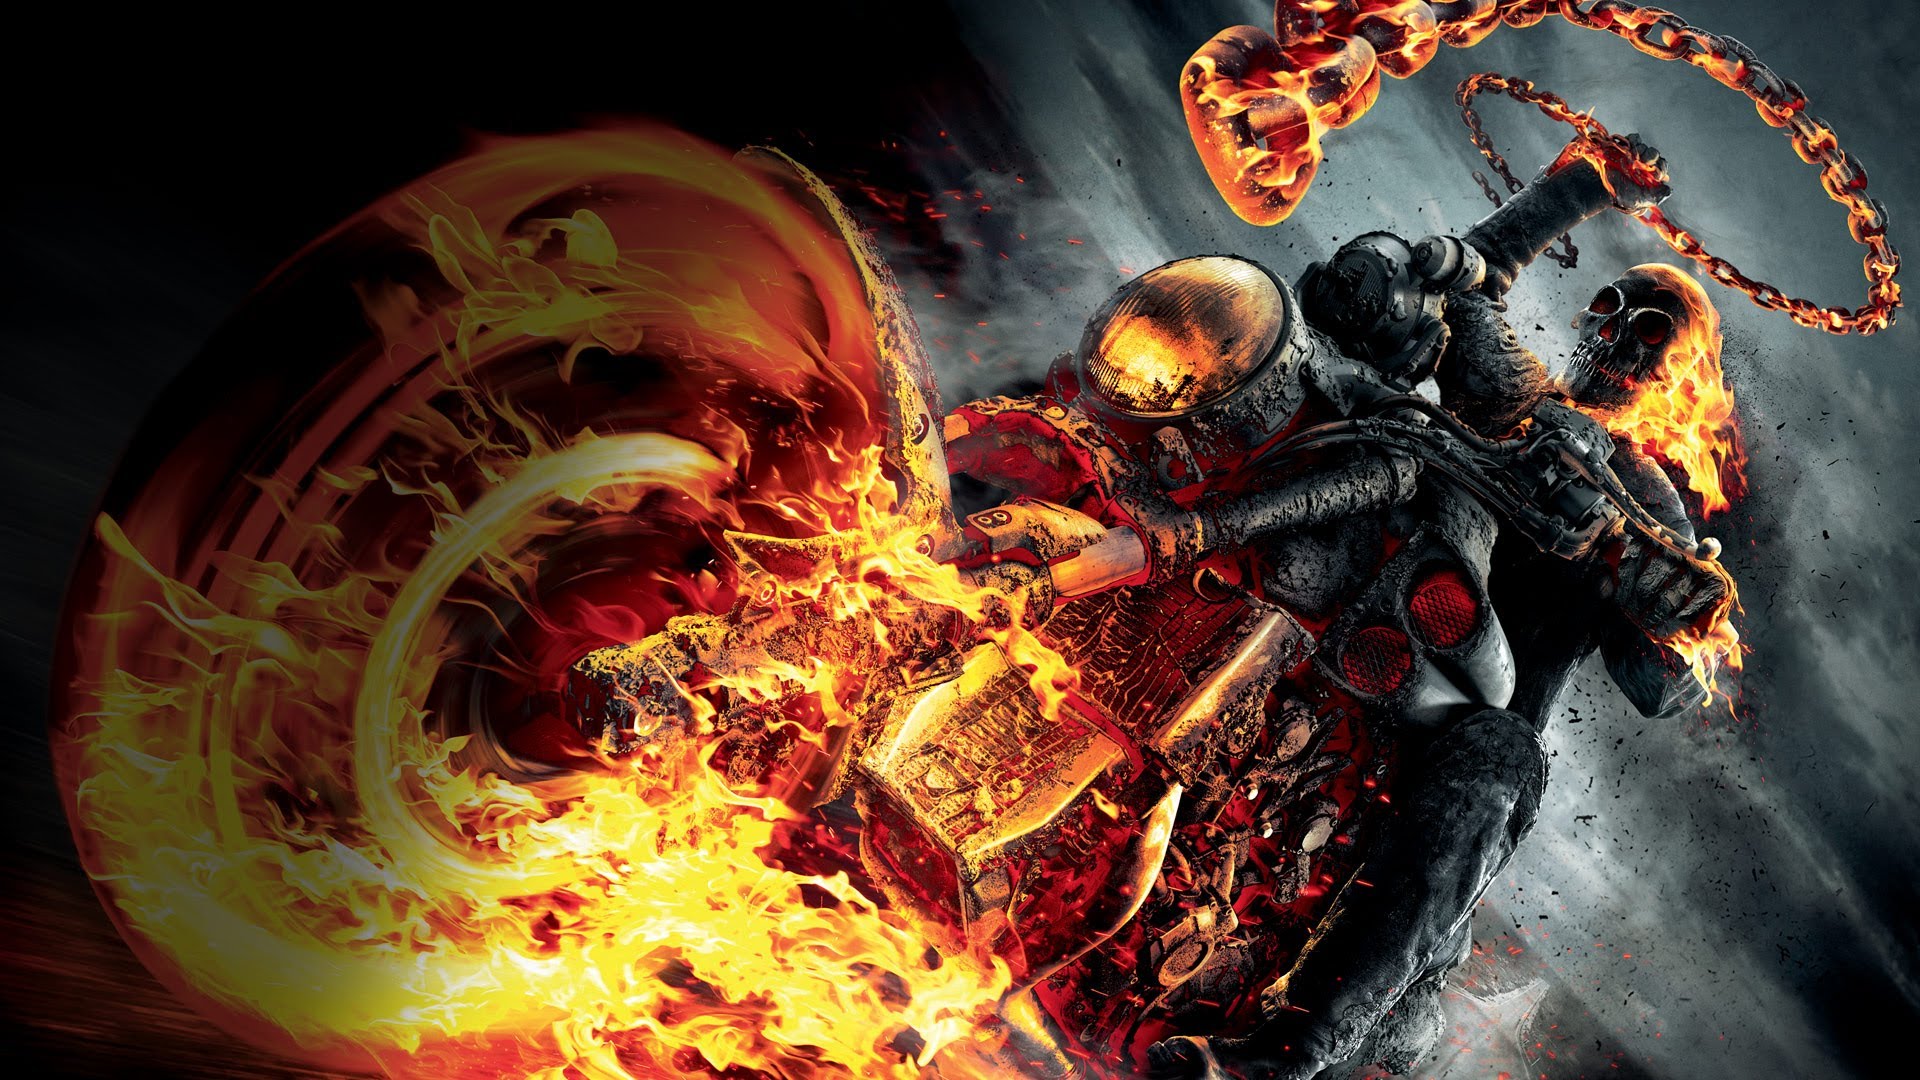 Ghost Rider 2 Director Opens Up On R-Rated Horror Screenplay Concept